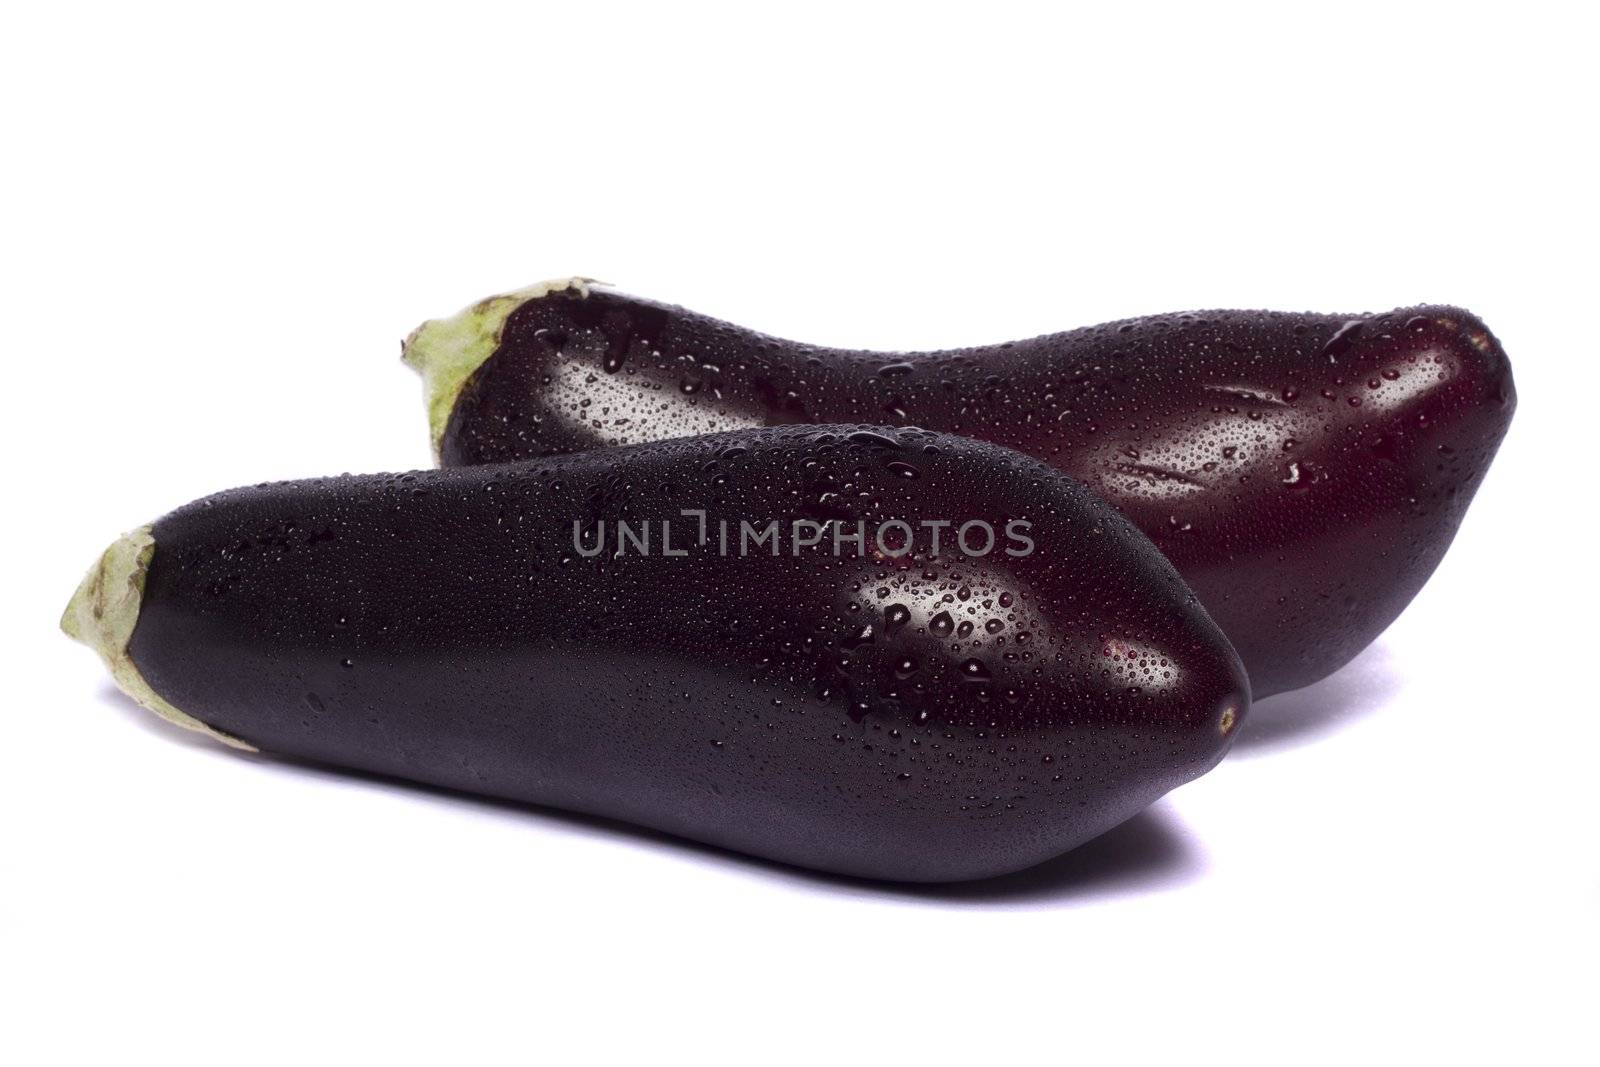 Close up view of an eggplant vegetable isolated on a white background.